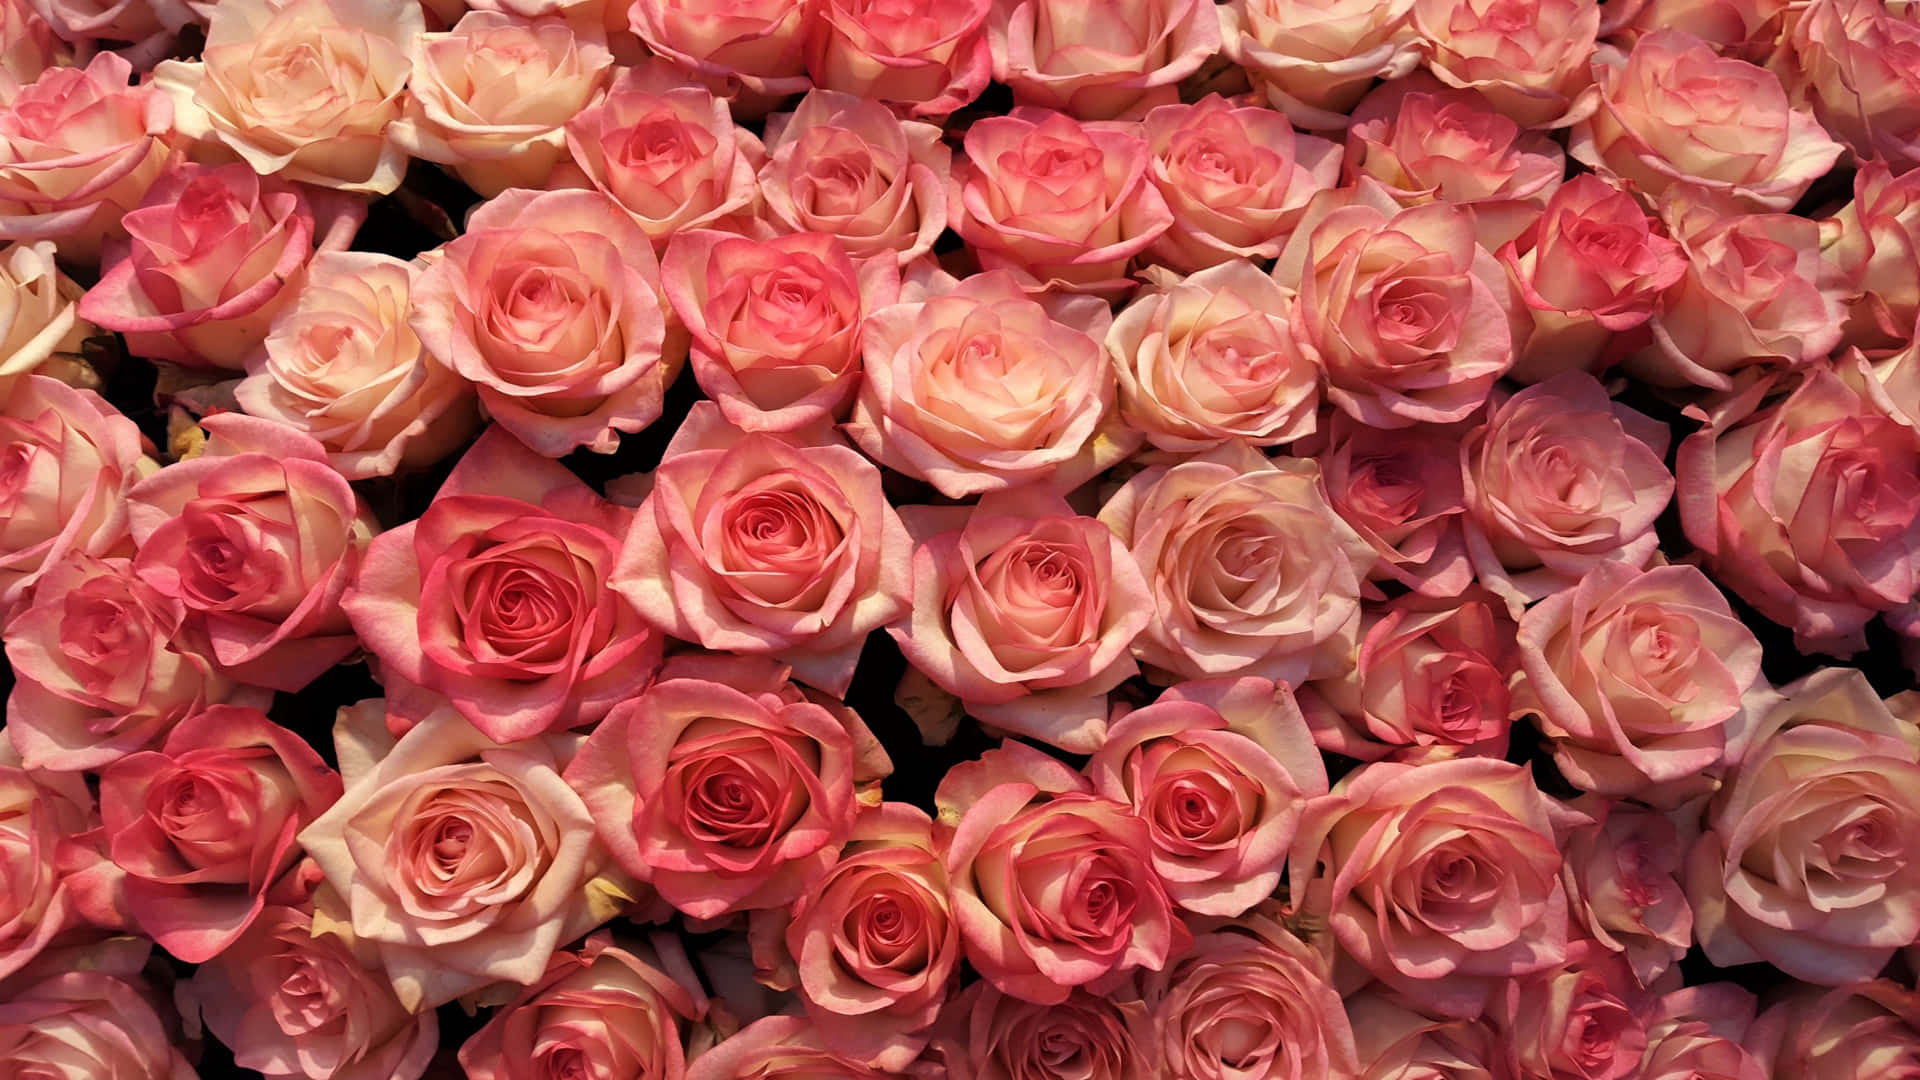 1440p Roses In Pink Shades Background